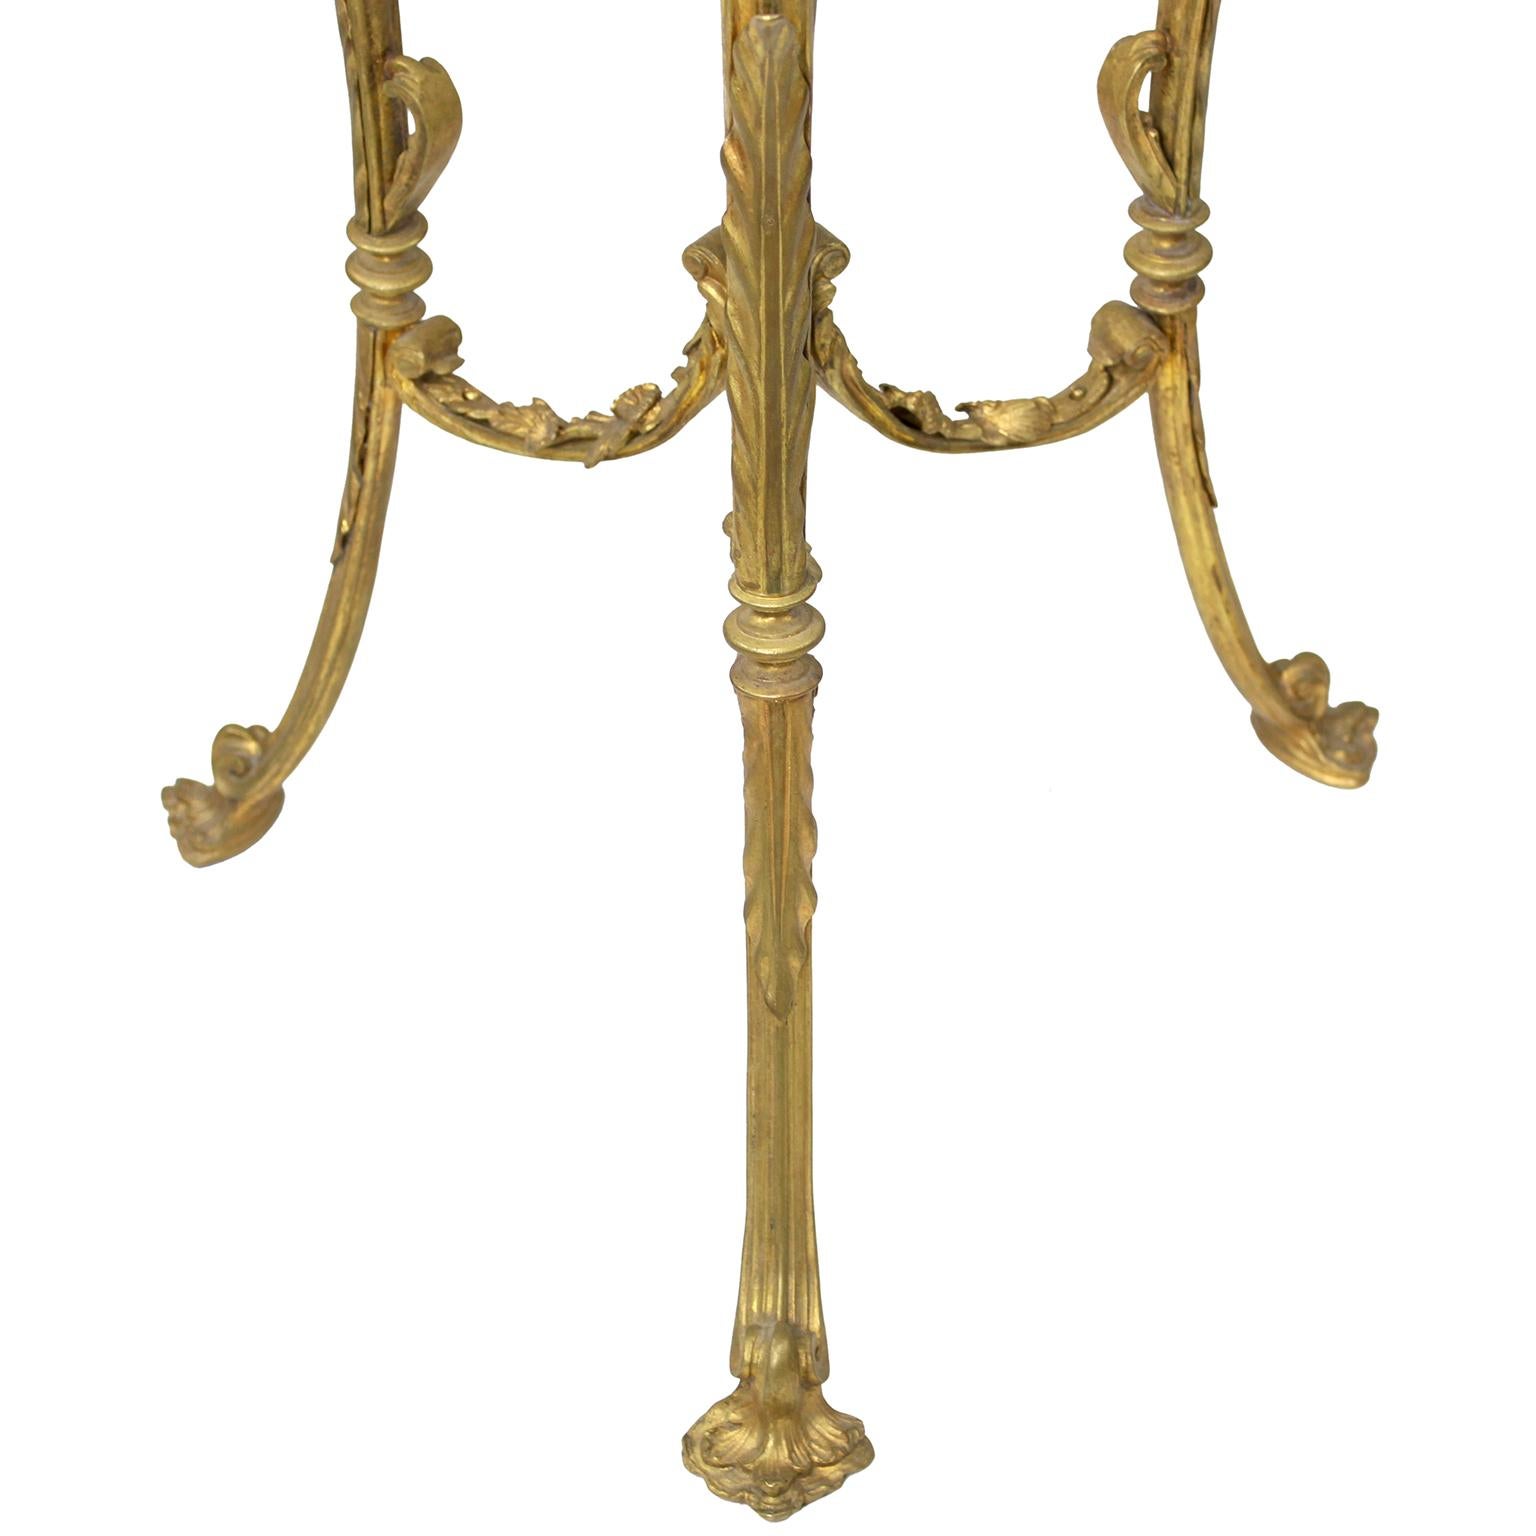 A French Belle Époque Louis XV Style Gilt-Bronze Gueridon Table with Marble Top For Sale 5